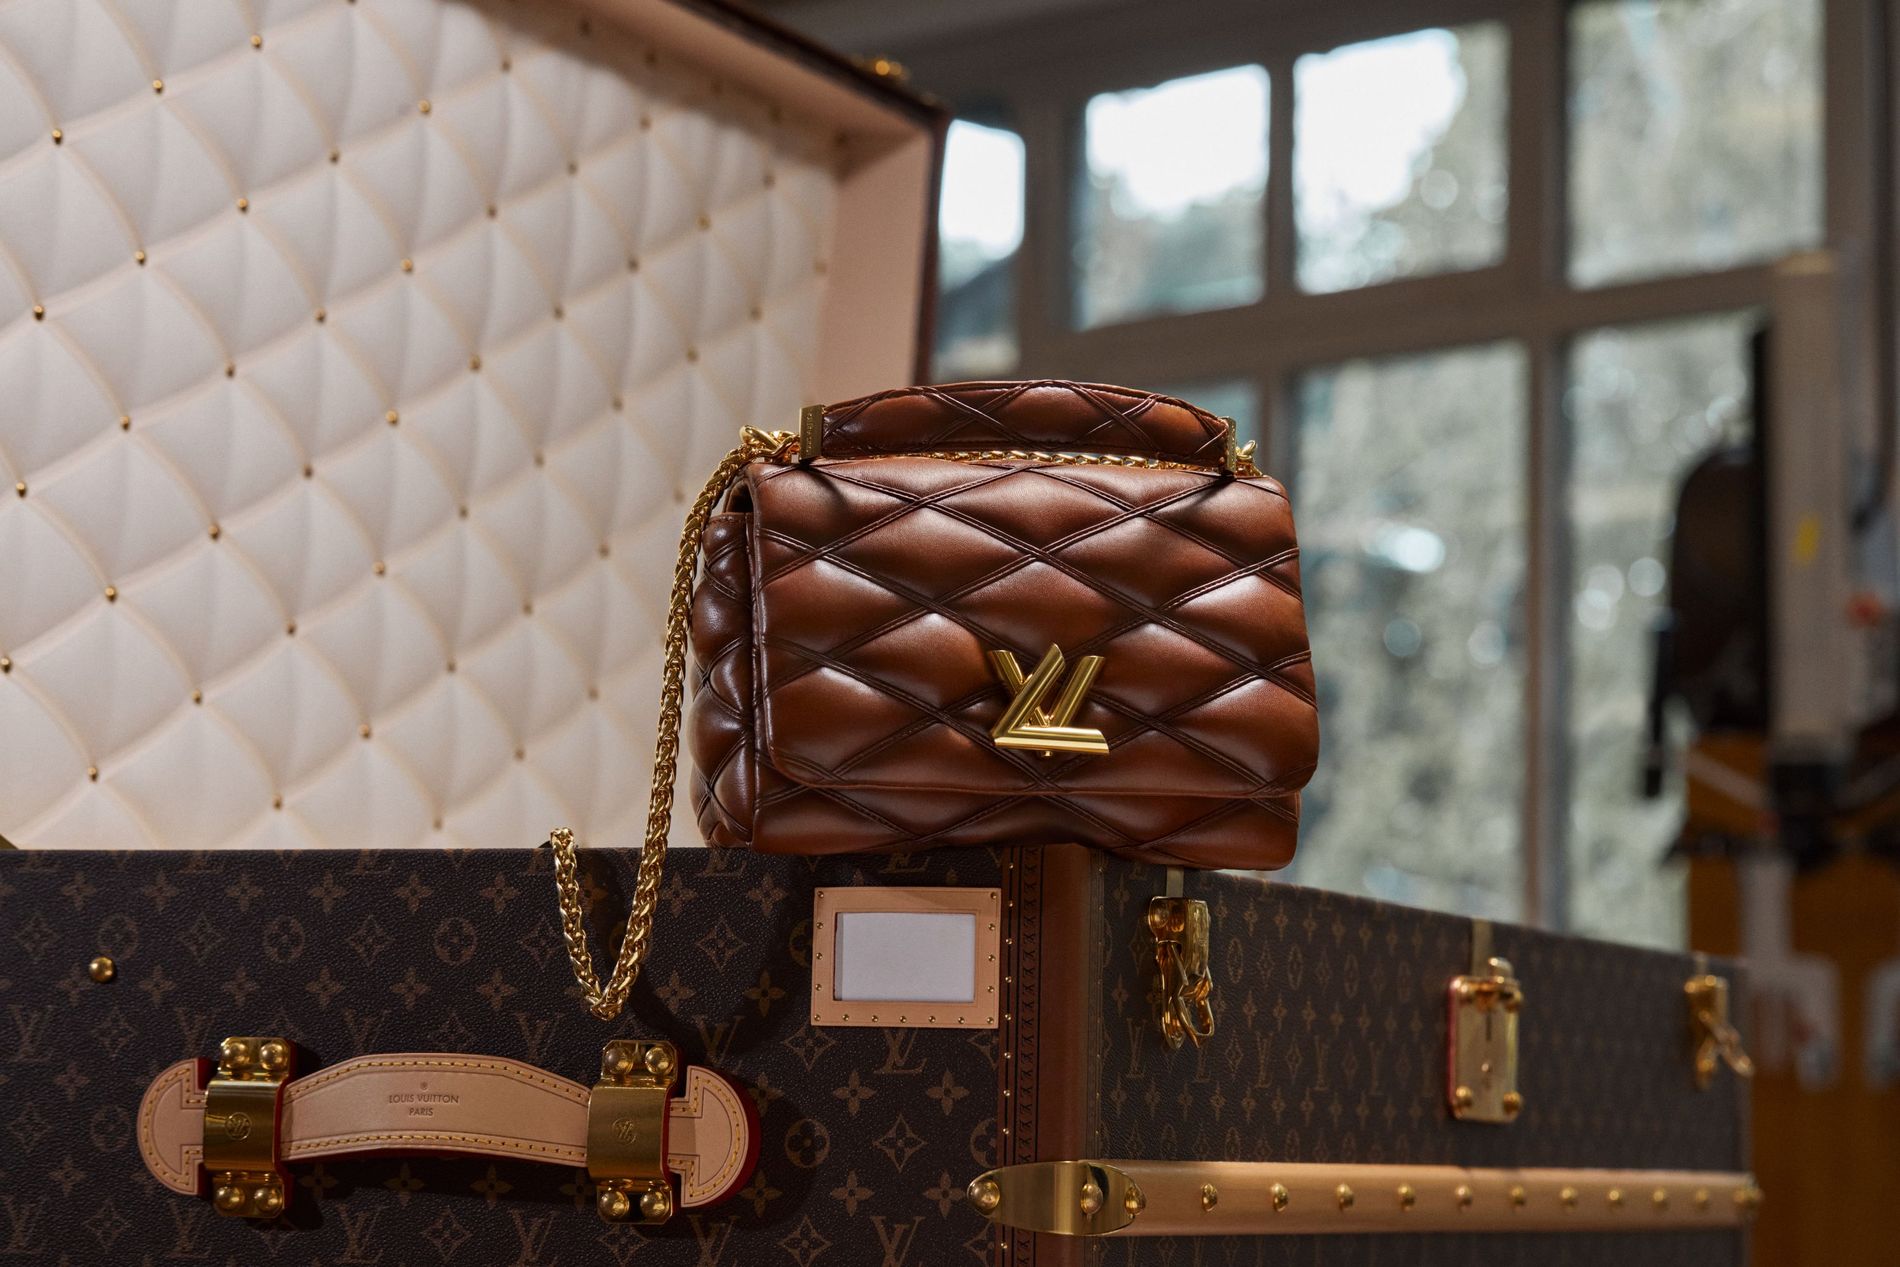 Louis Vuitton's new capsule collection takes inspiration from the